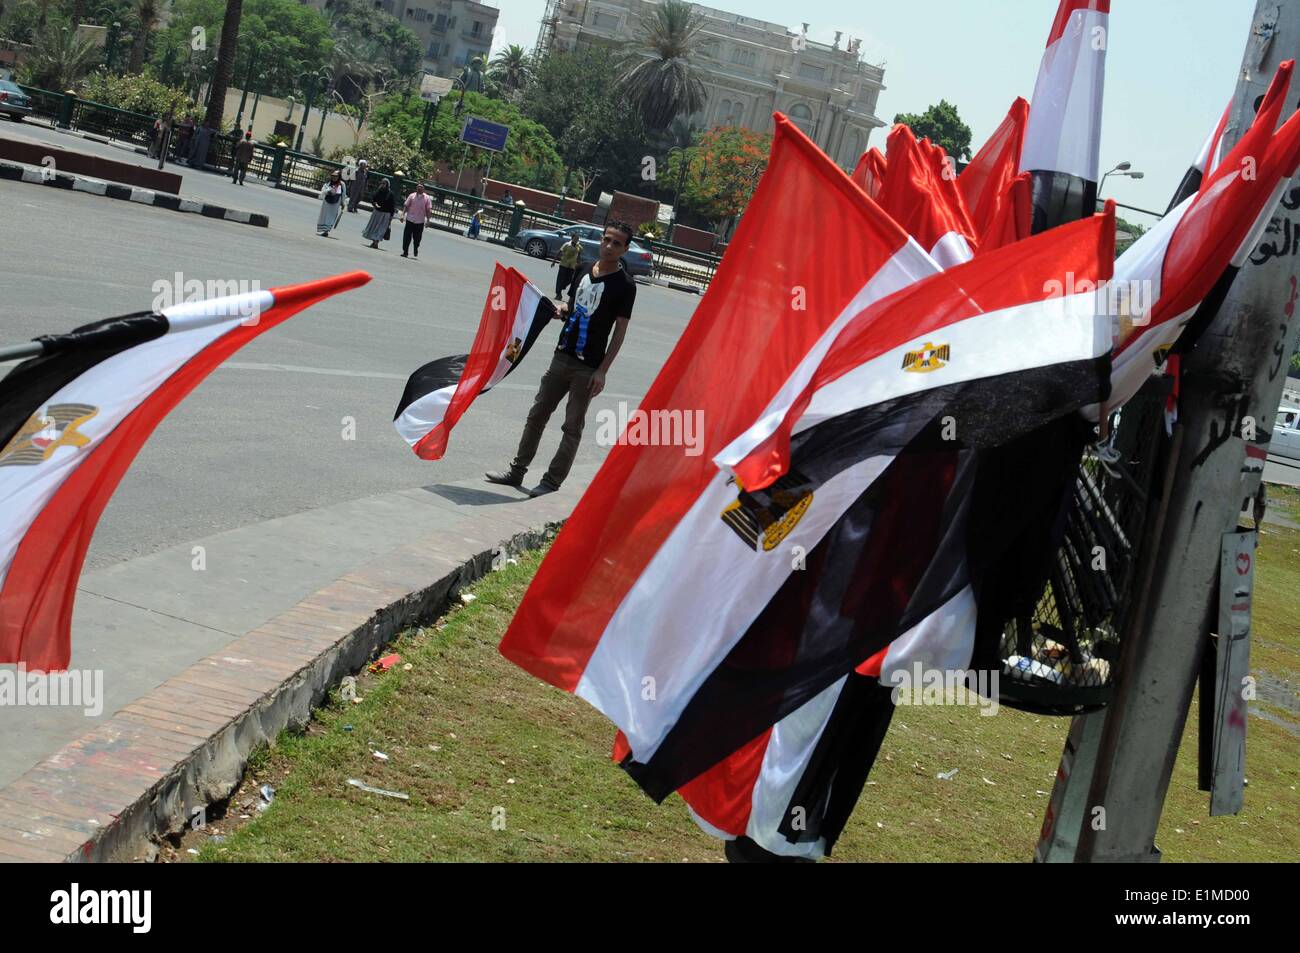 Cairo, Egypt. 6th June, 2014. Former military chief Abdel Fattah Al Sisi was officially declared president of Egypt on Tuesday, less than a year after he orchestrated a coup that ousted the nation's first freely elected president. Credit:  Nameer Galal/NurPhoto/ZUMAPRESS.com/Alamy Live News Stock Photo